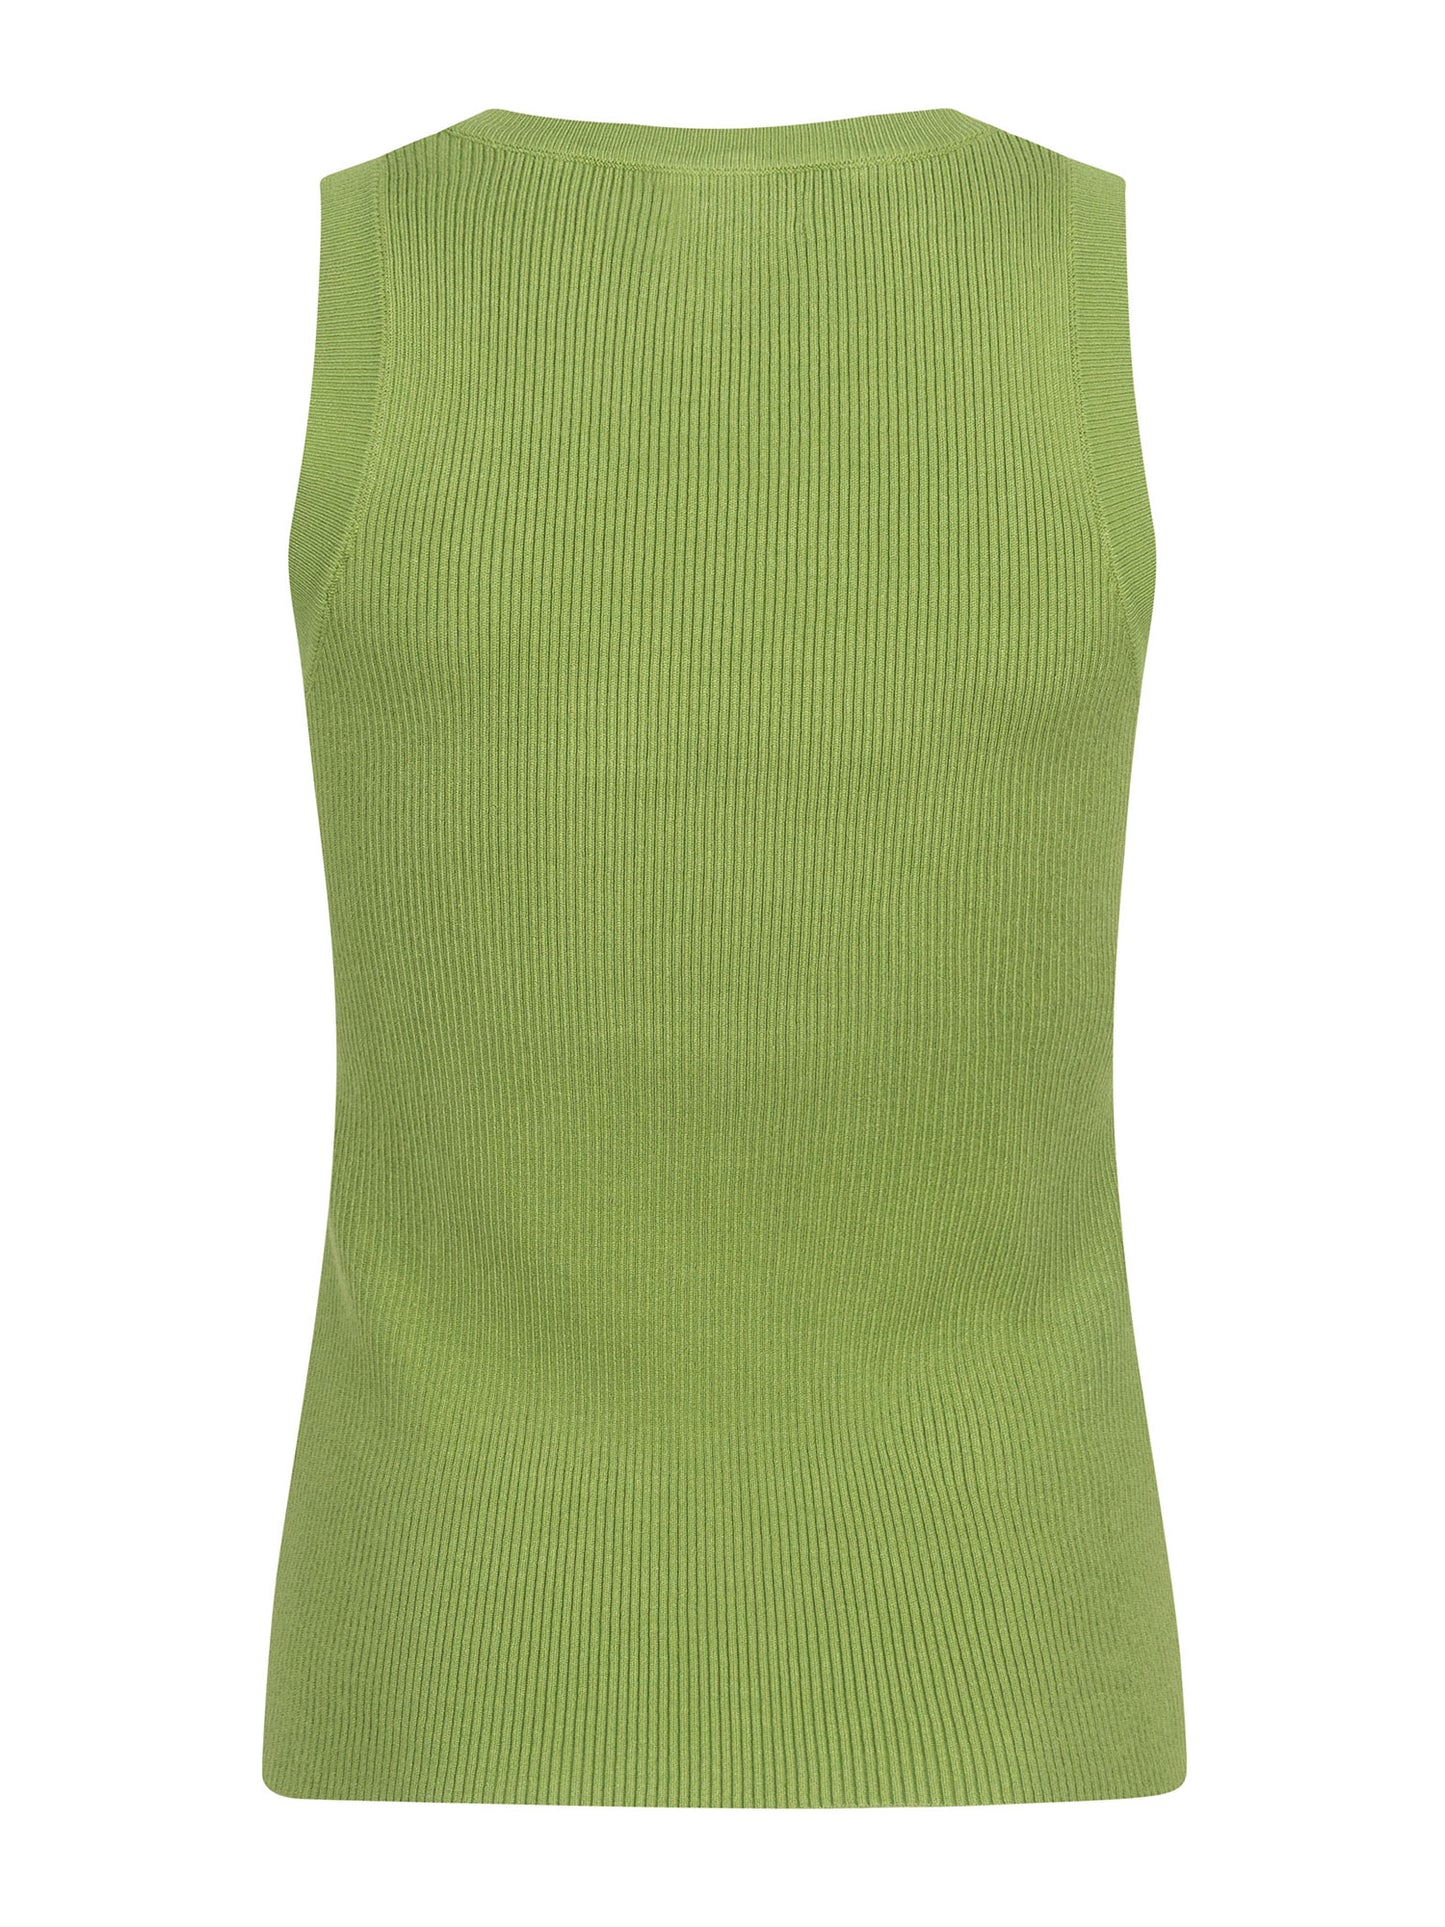 Knitted top keely green